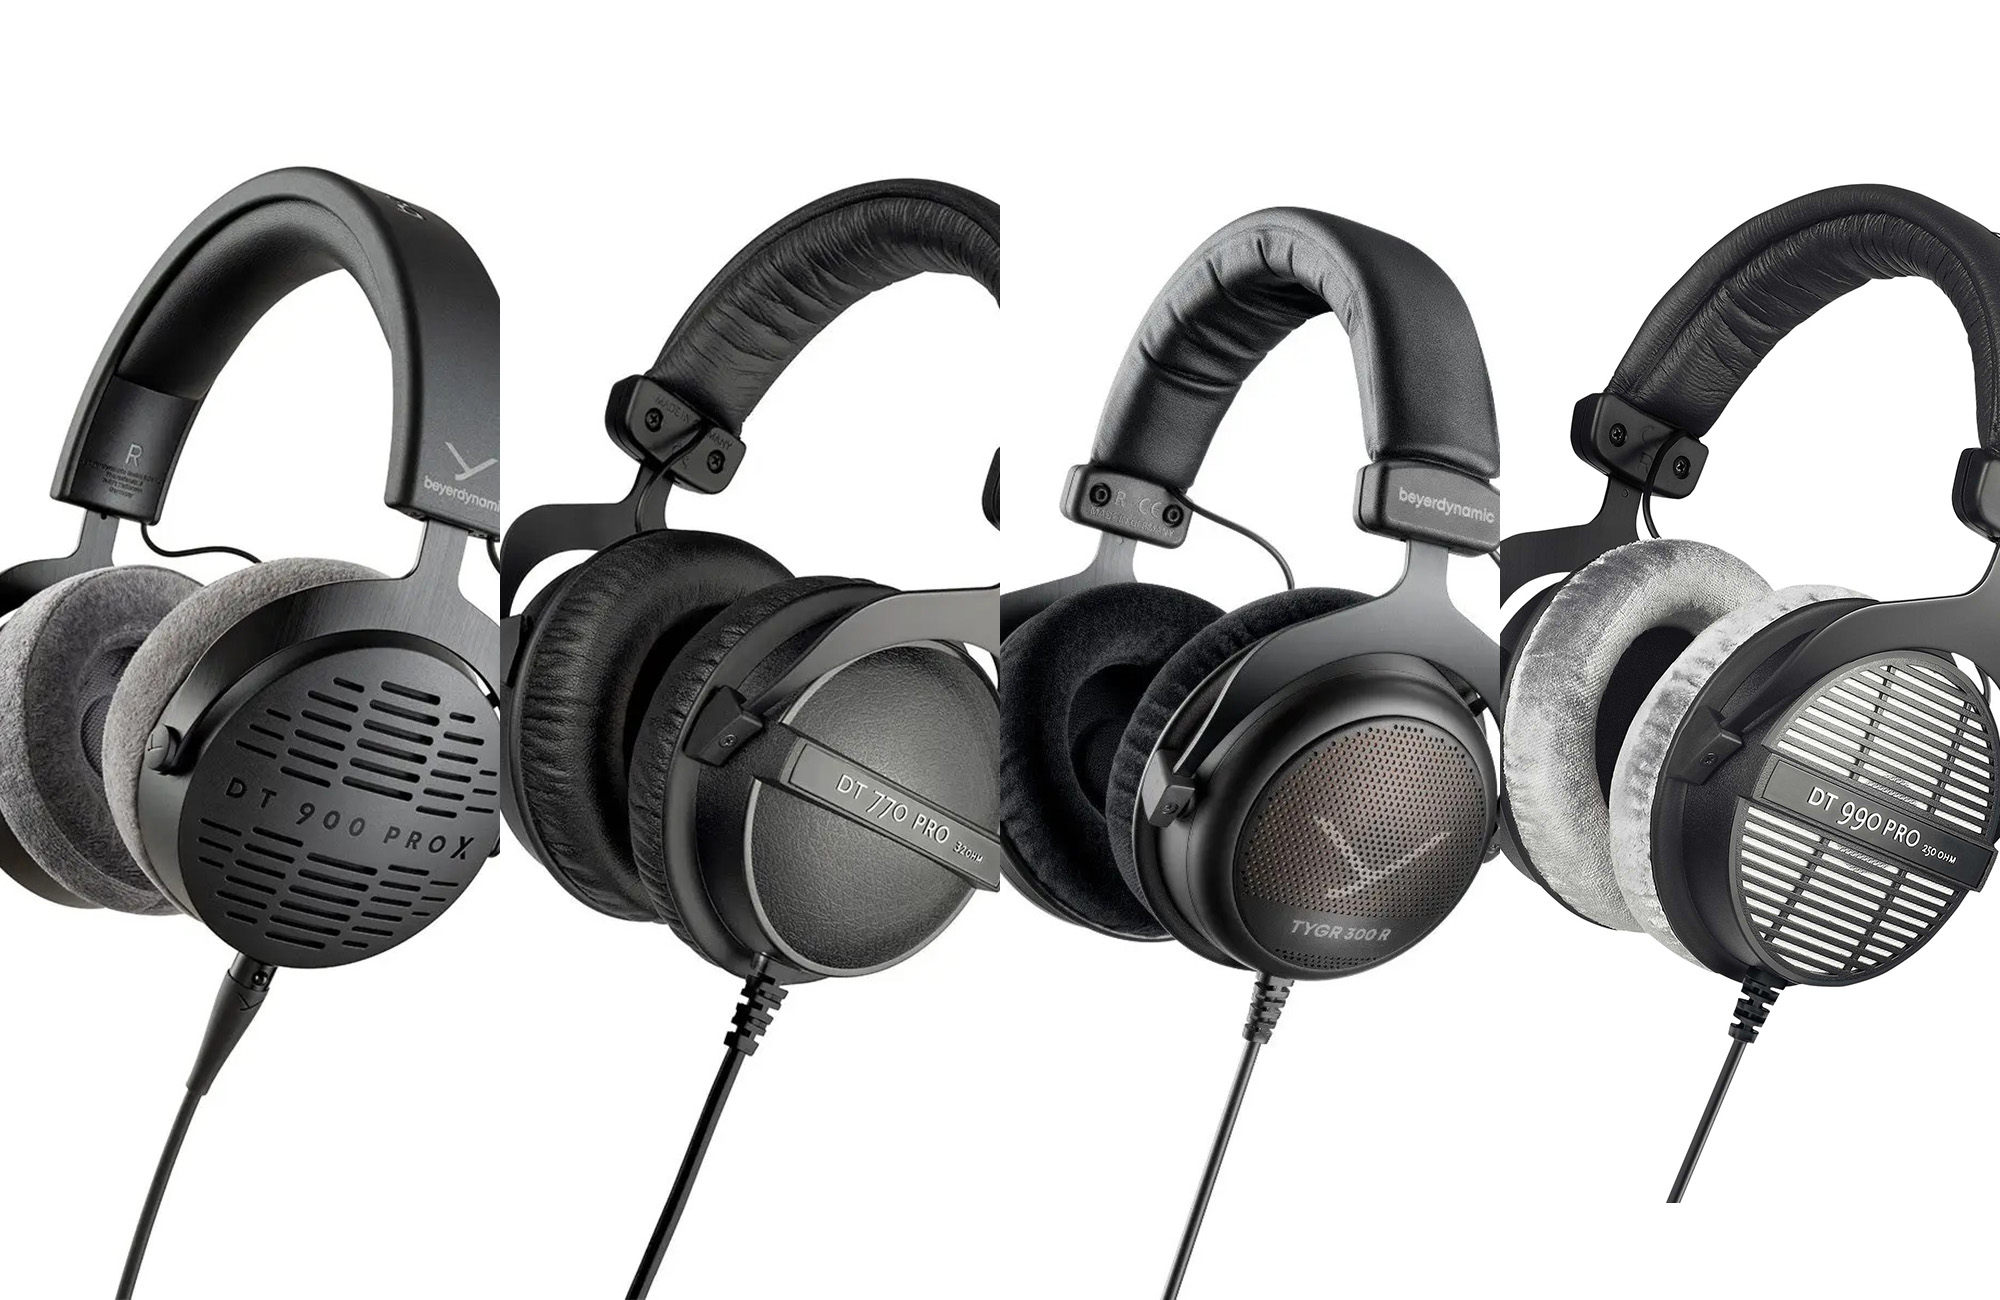 A line-up of headphones on a white background